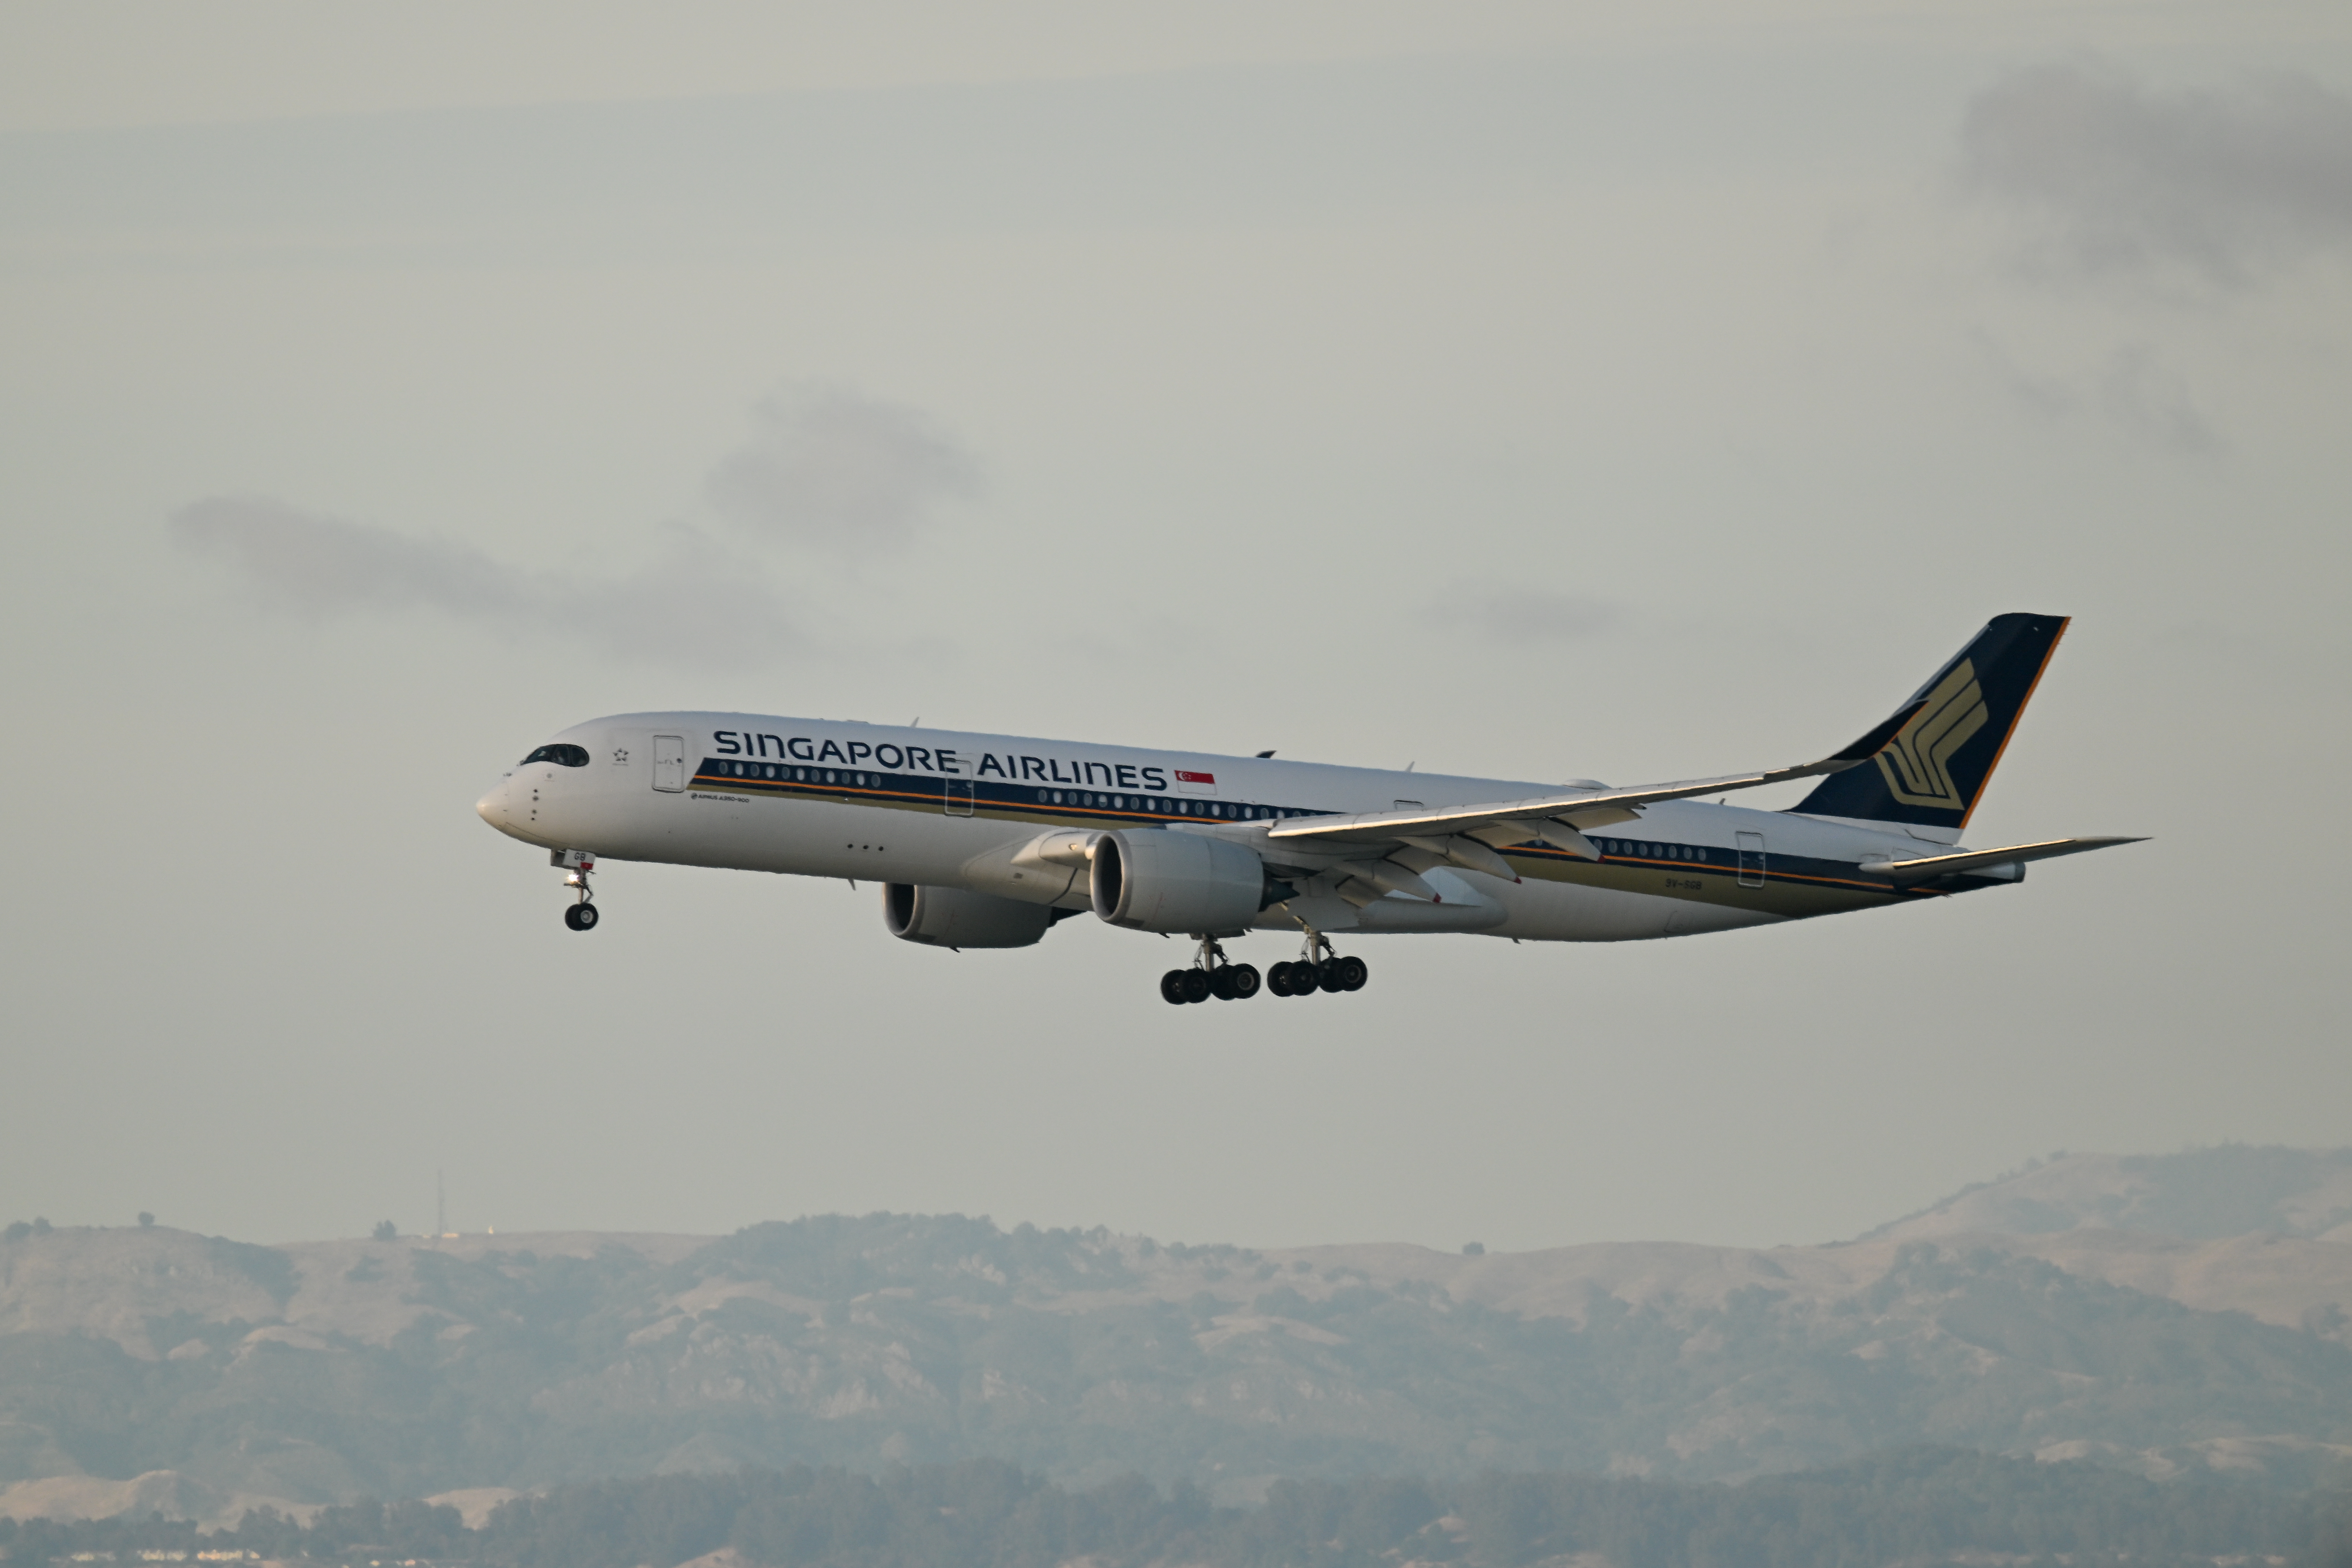 Singapore Airlines will operate a new route from an airport in London